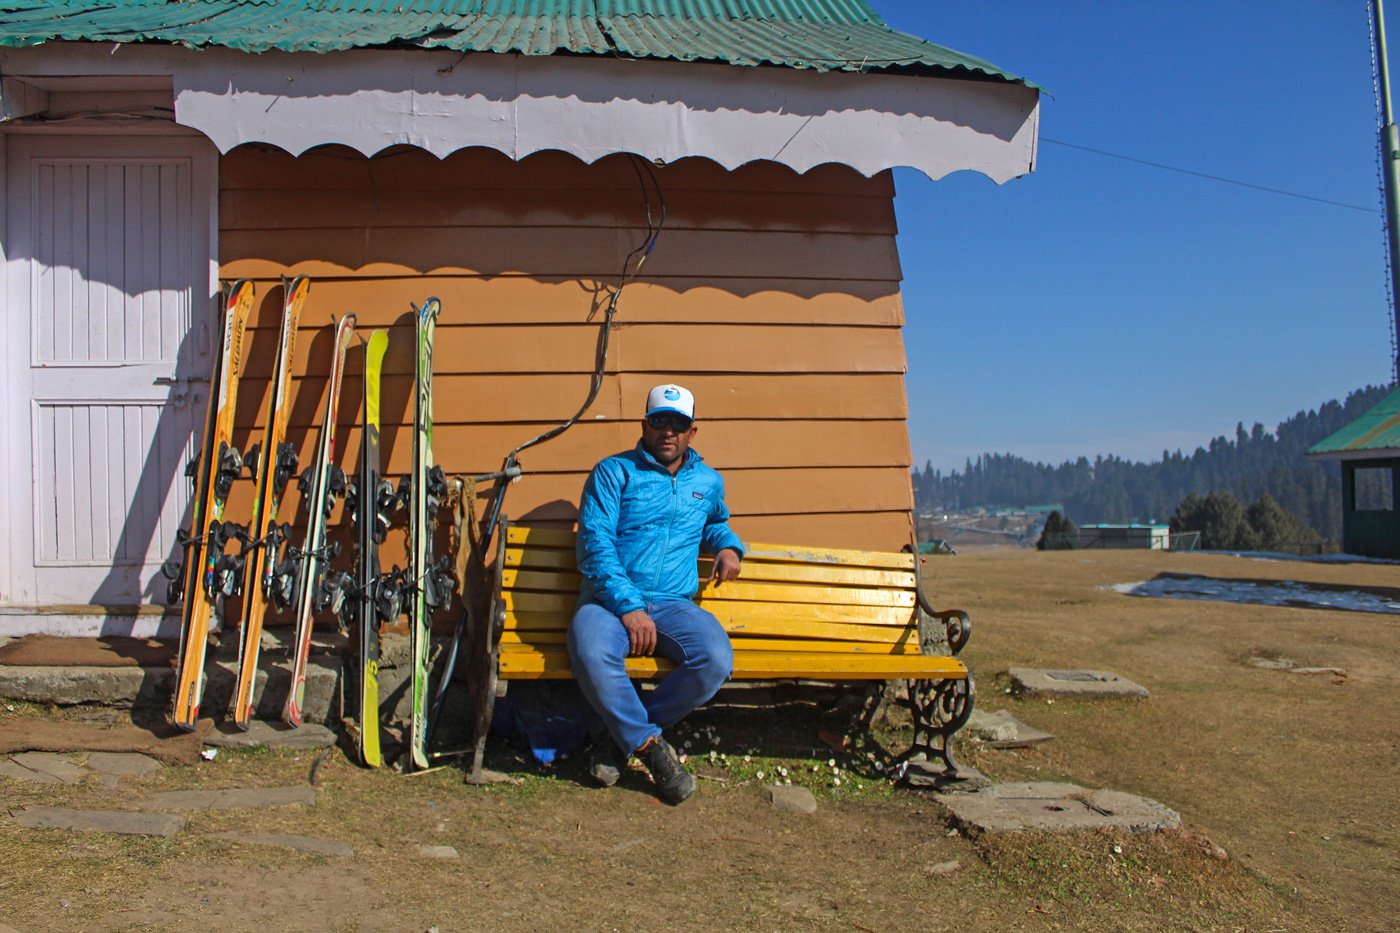 Javaid Reshi displays ski gear outside his hut in Gulmarg. Lack of snow in January has affected his livelihood